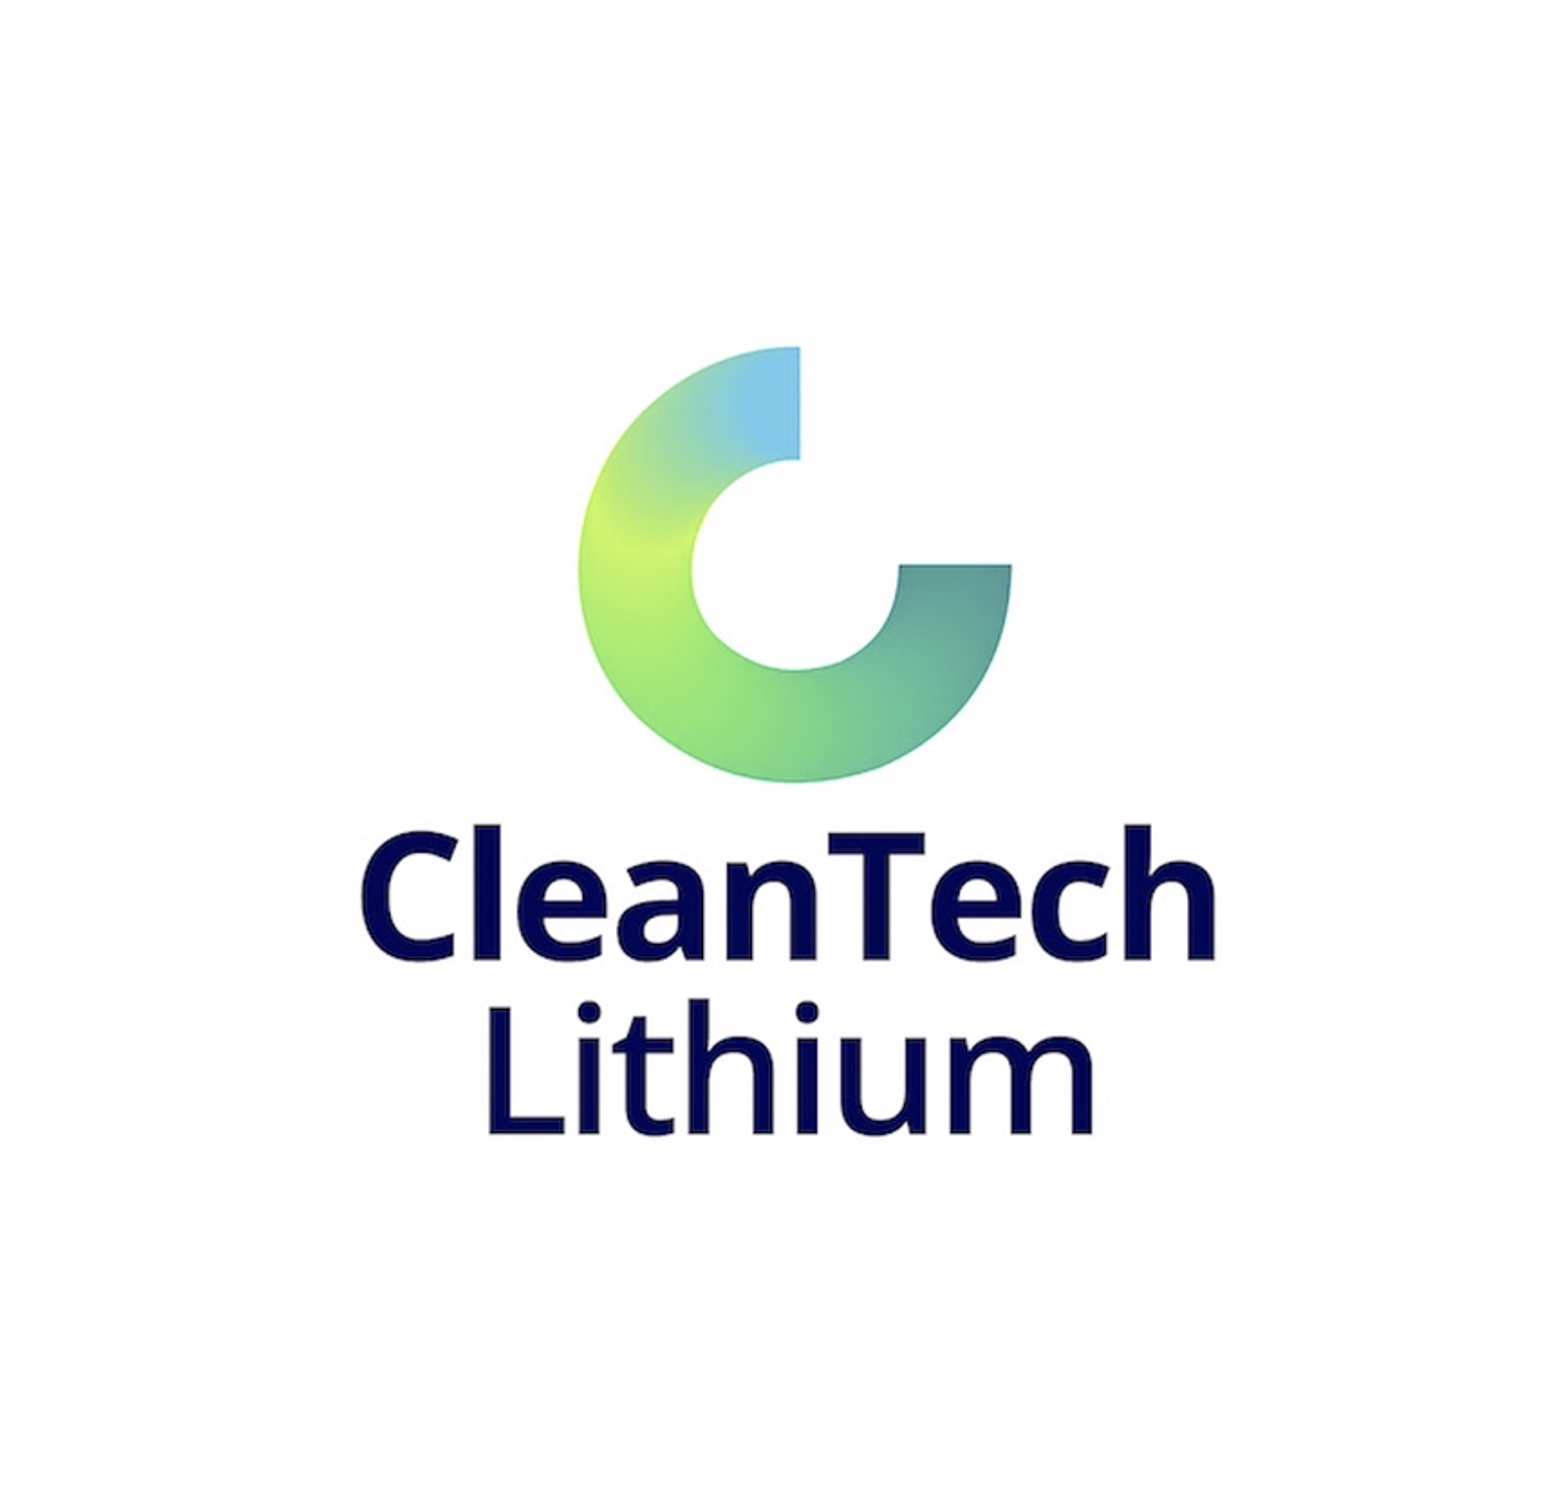 1595: Aldo Boitano of CleanTech Lithium: “We’ve moved from 500,000 tons of lithium carbonate equivalent to almost a million”